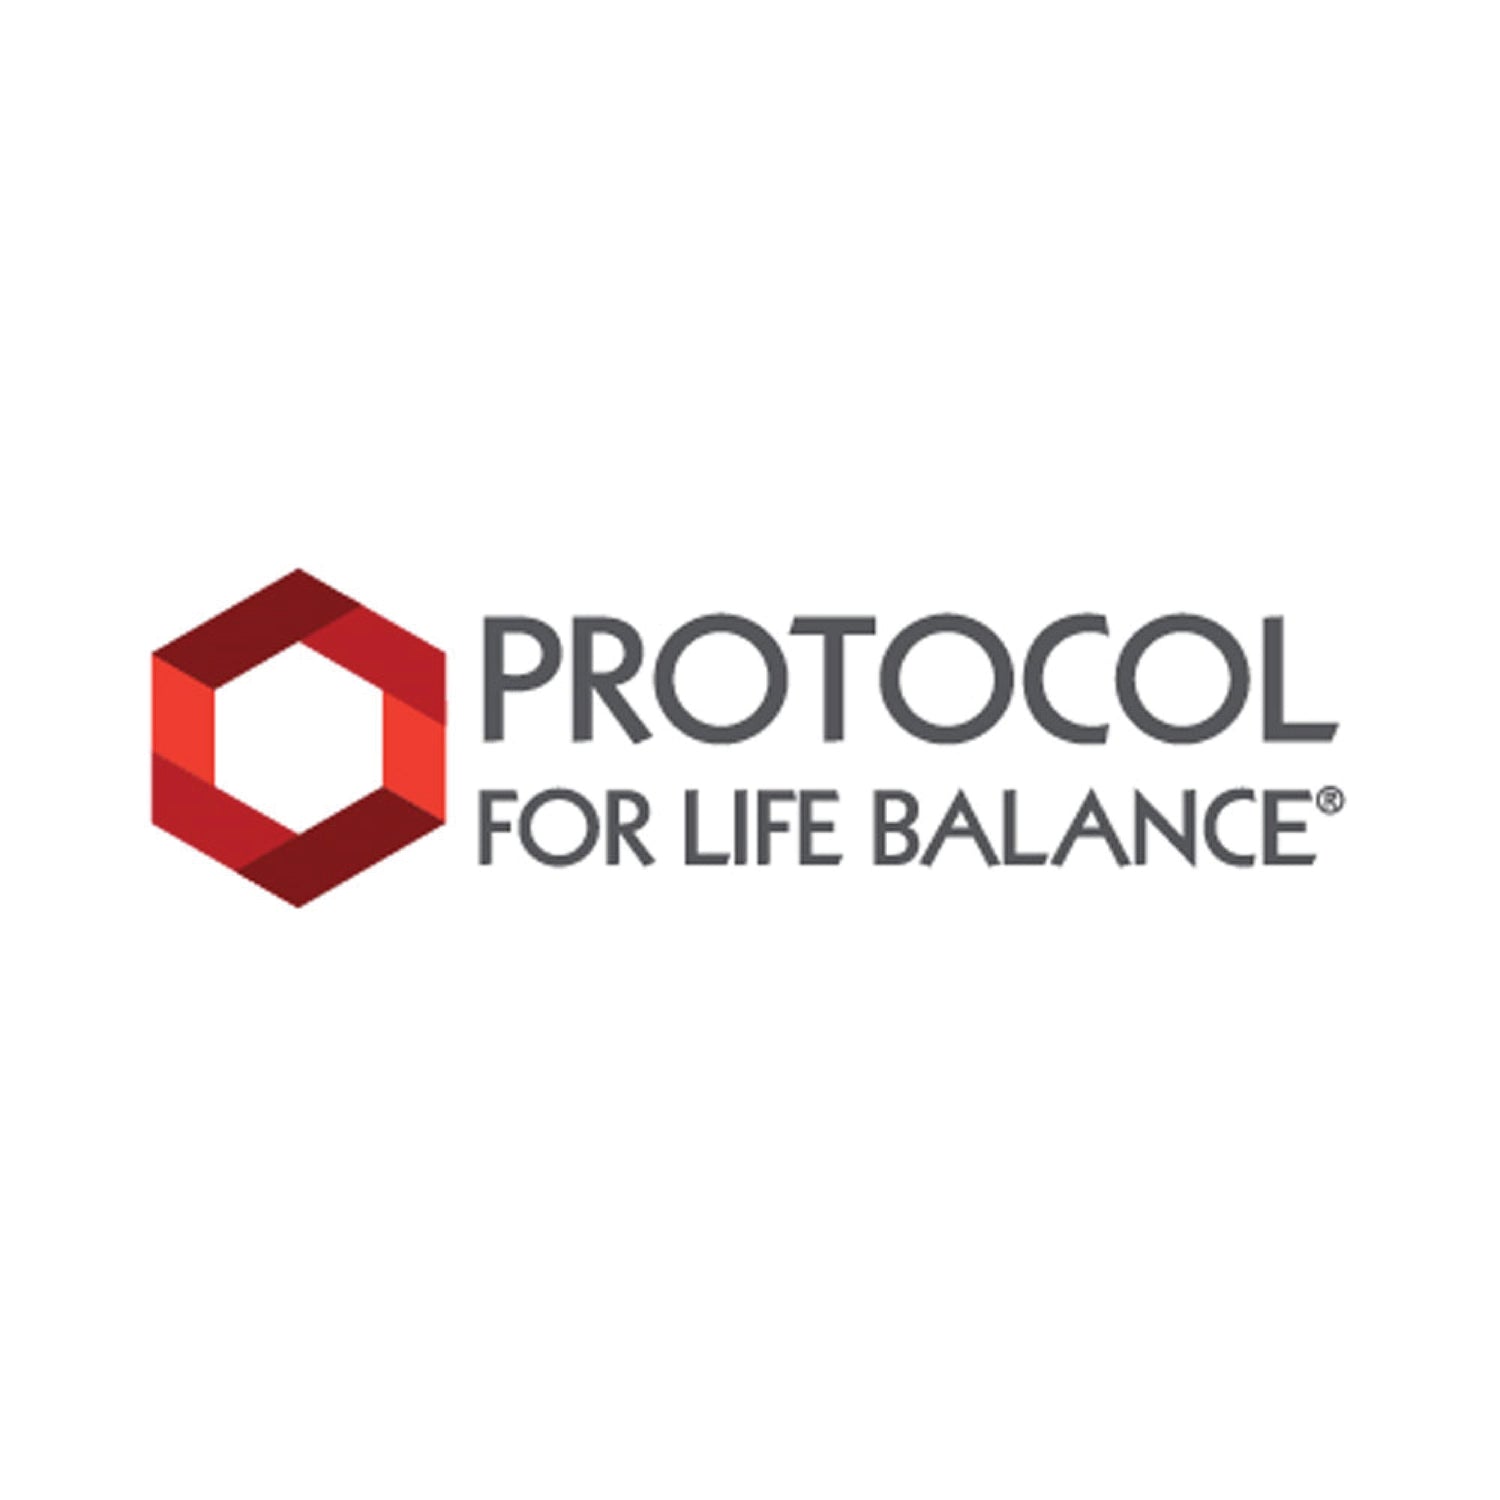 Protocol for Life Balance, Flax Seed Oil, 1,000 mg, 120 Softgels - Bloom Concept